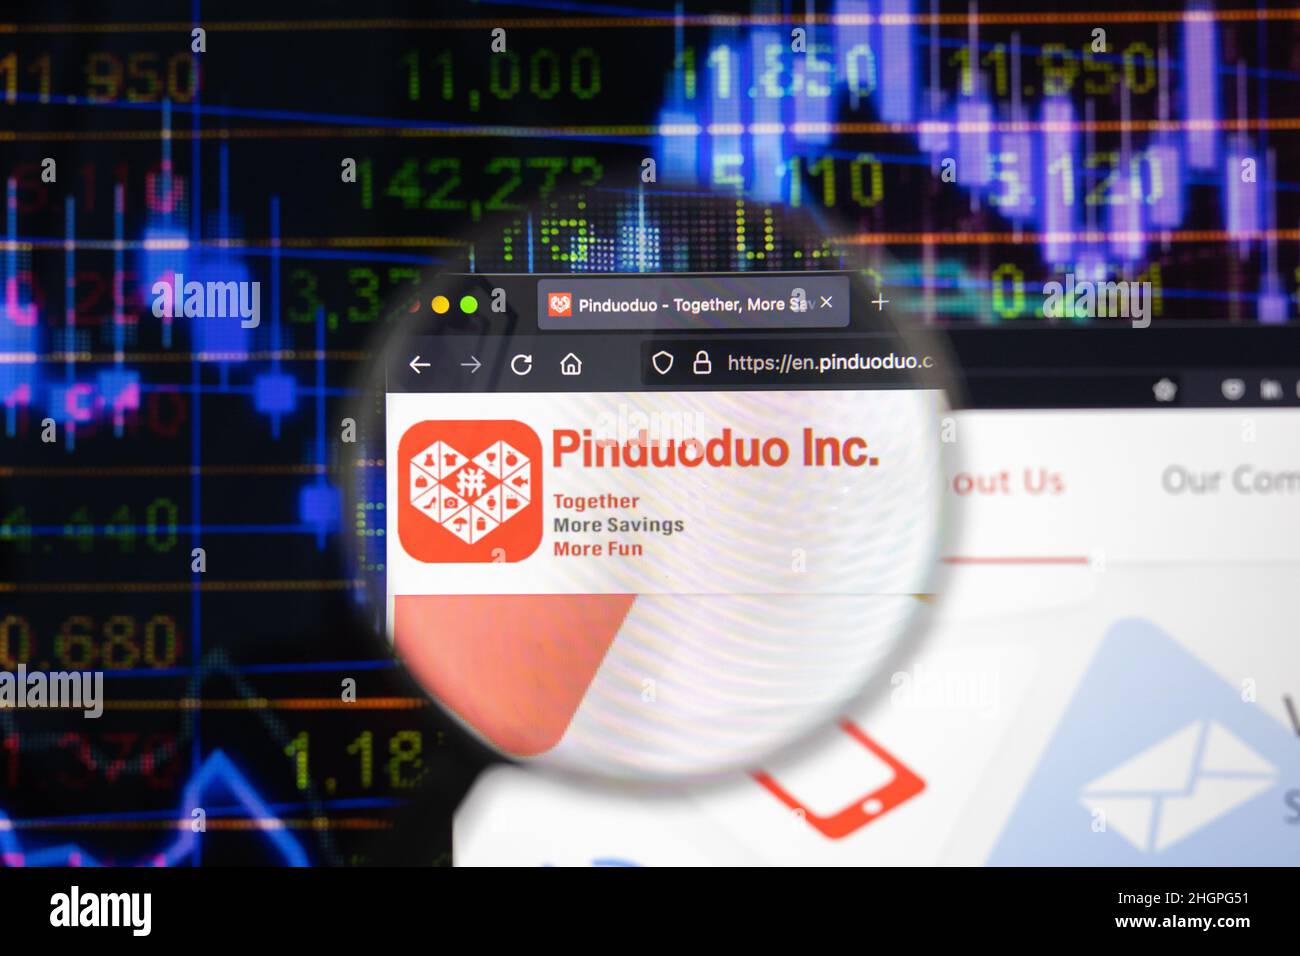 Pinduoduo Inc. company logo on a website with blurry stock market developments in the background, seen on a computer screen through a magnifying glass Stock Photo